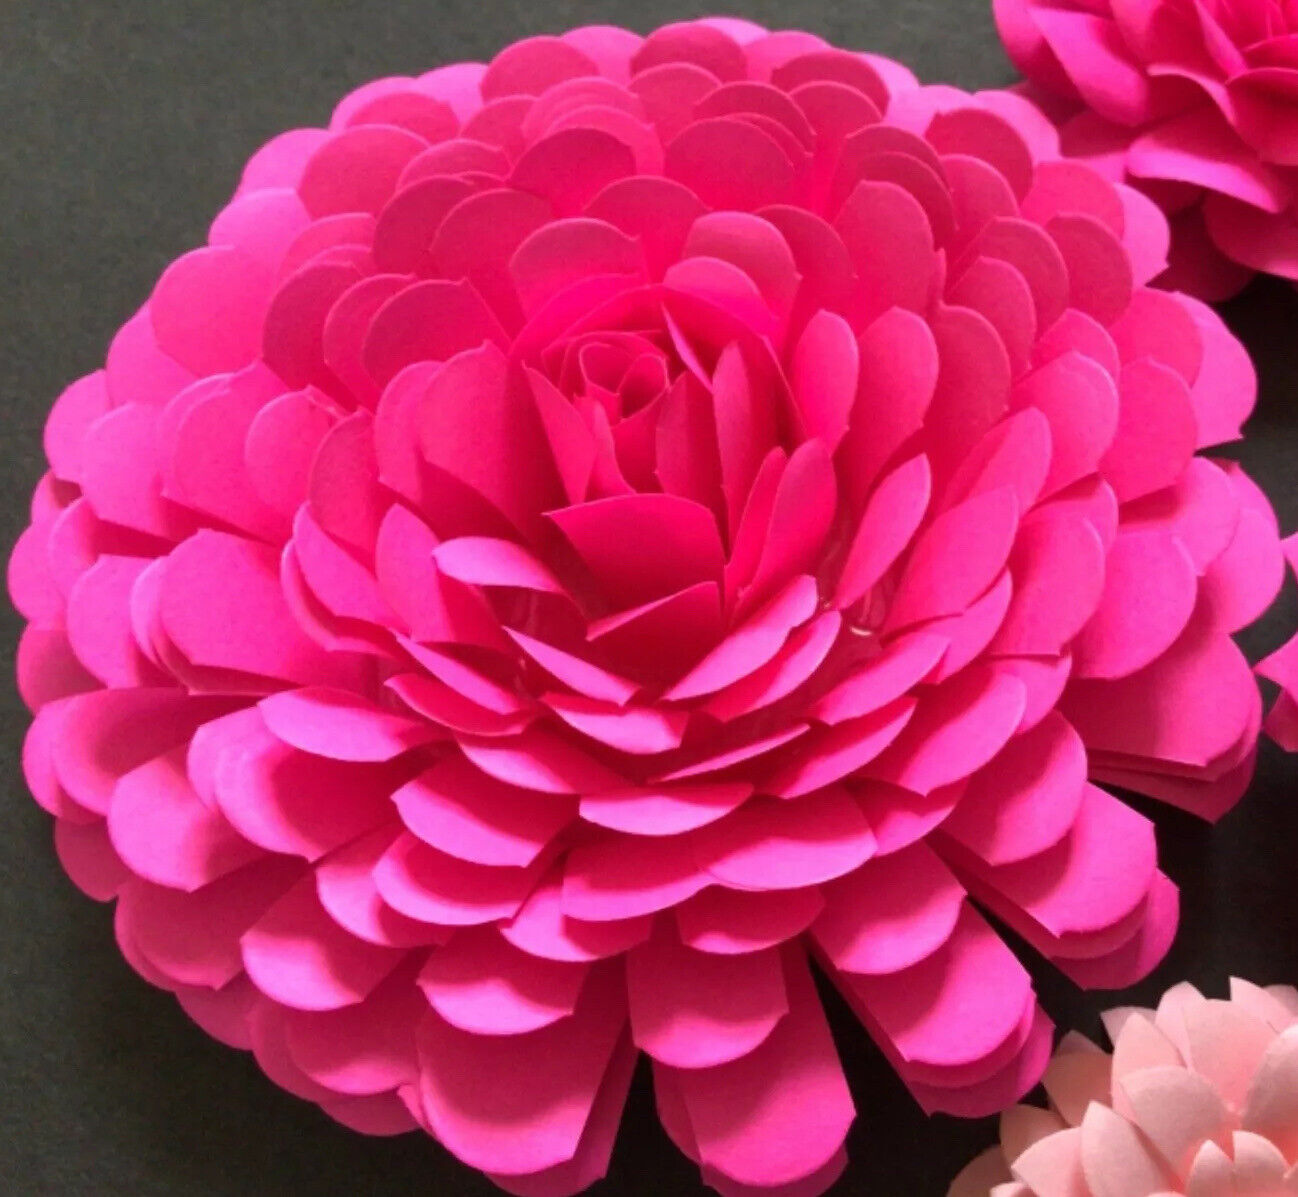 Paper Flowers 3-D Handcrafted 5 pcs Pink DIY Wedding Party Decor Craft Backdrop Unbranded Small Backdrop - фотография #3